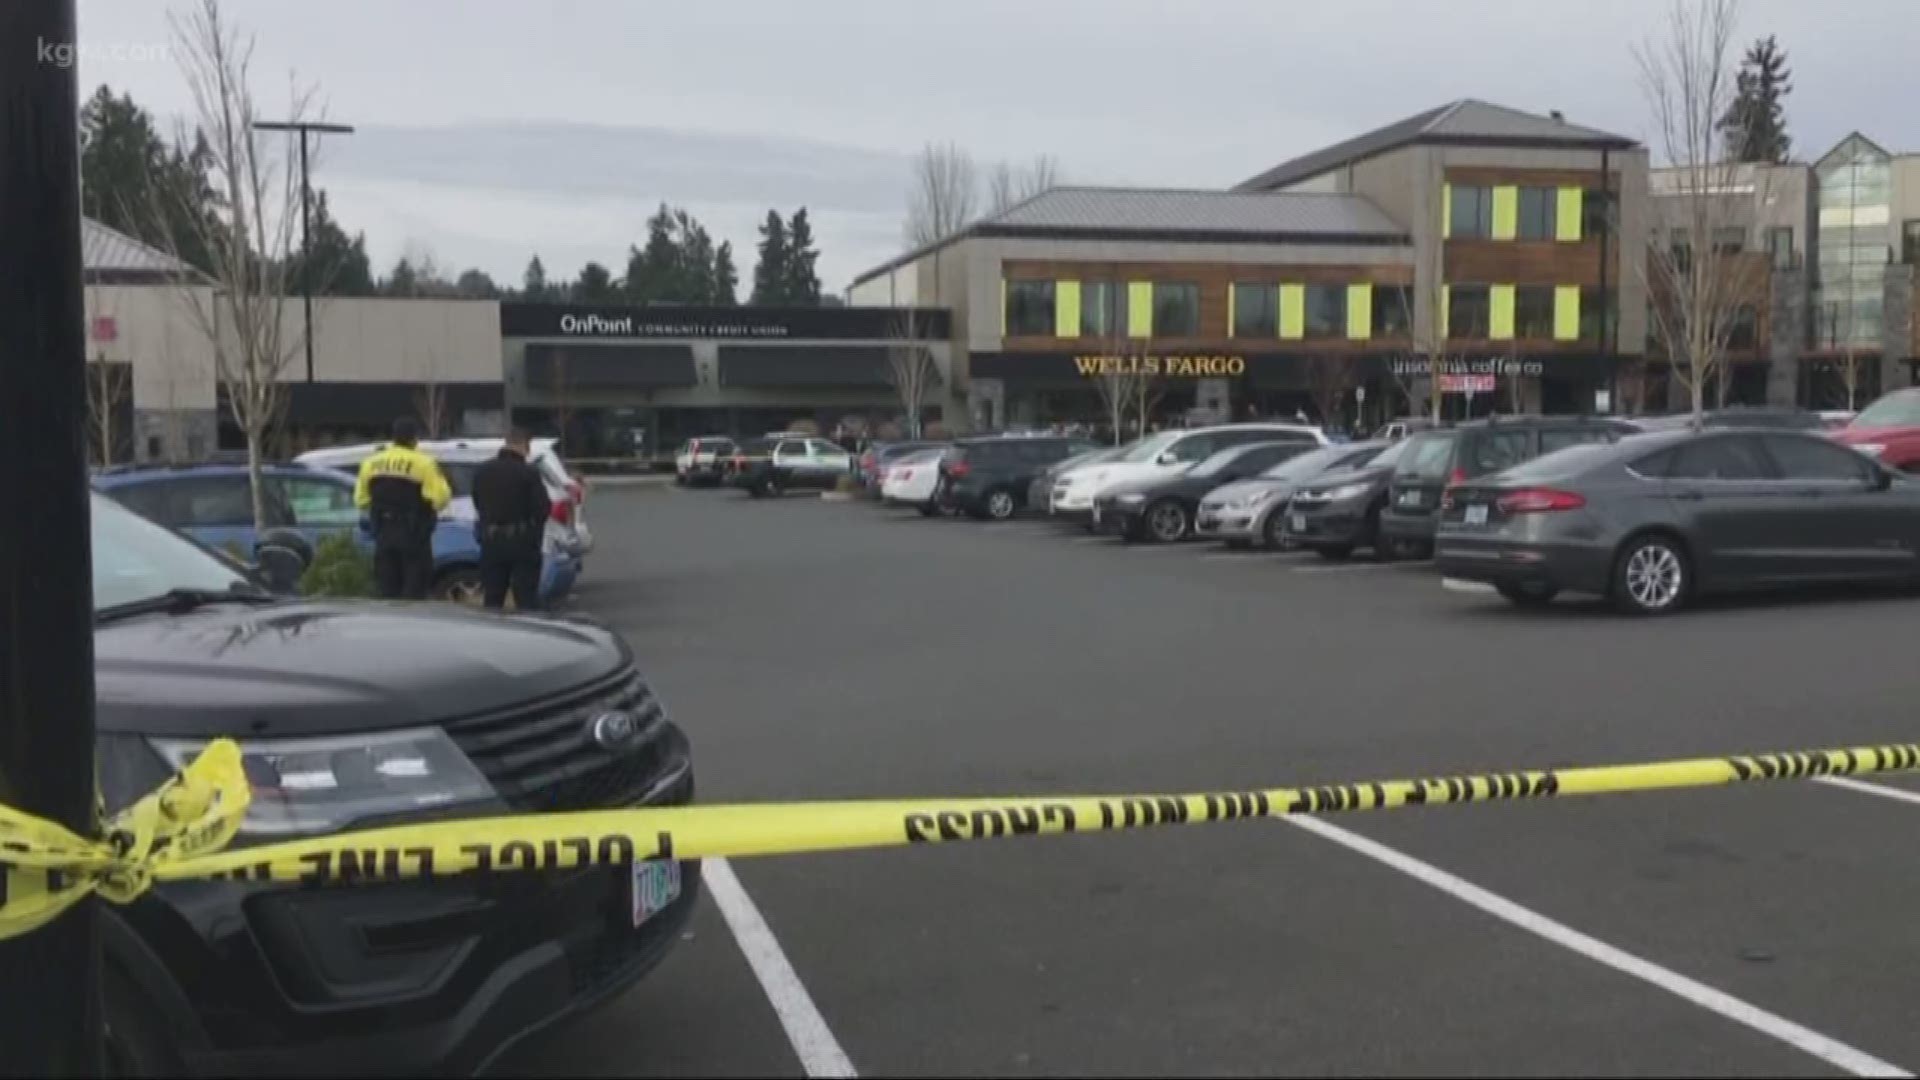 Three people were stabbed at the Murray Hill shopping center in Beaverton. The suspect was taken into custody after stealing a car.